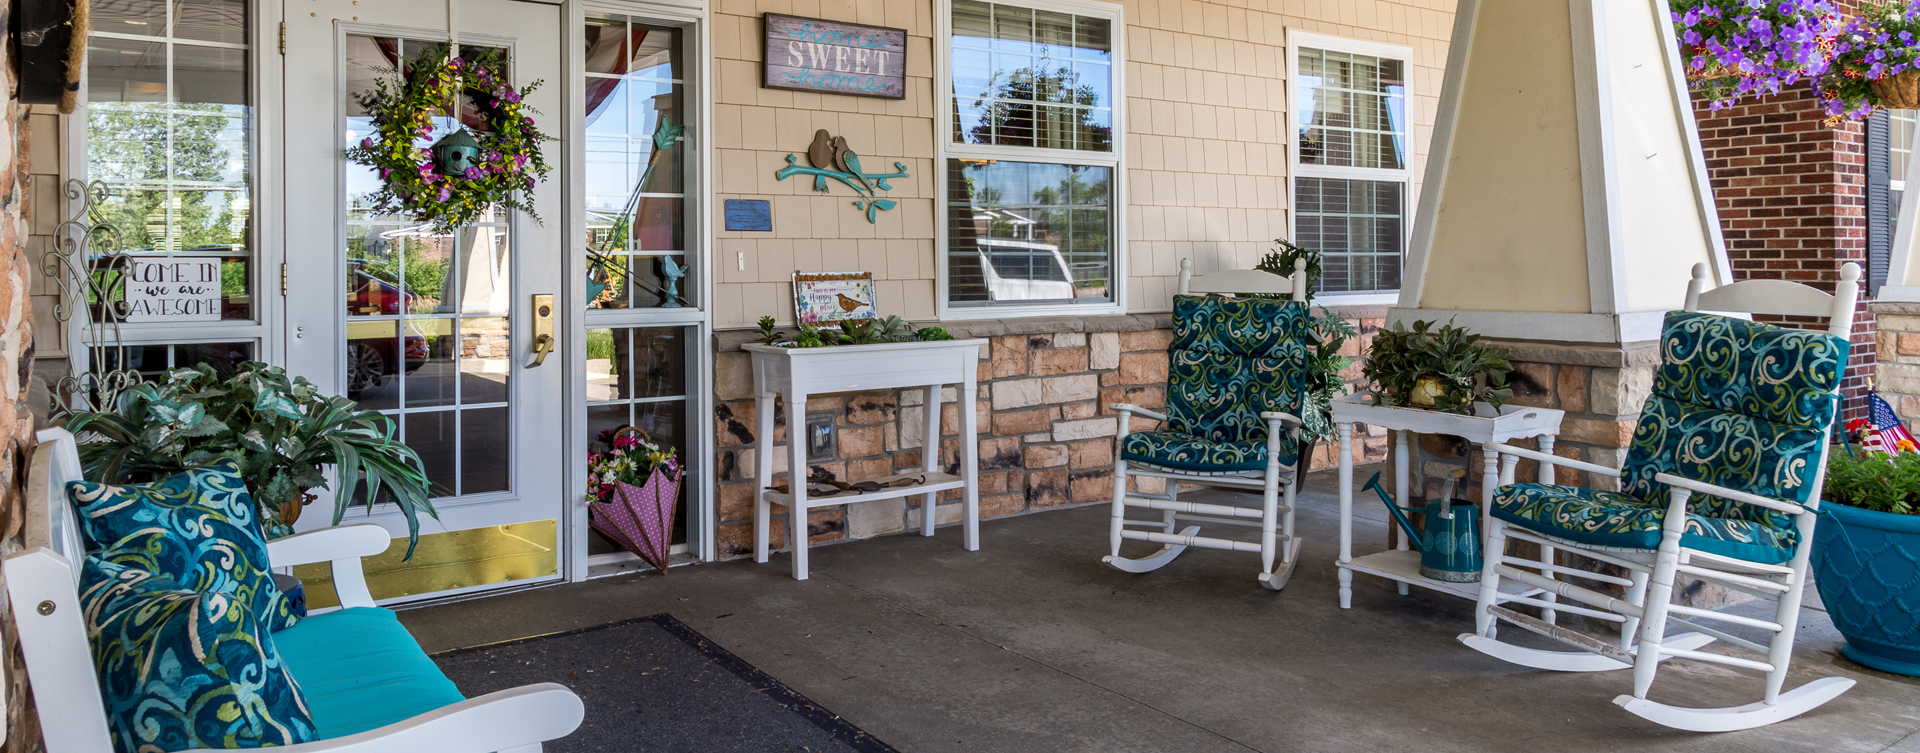 Relax in your favorite chair on the porch at Bickford of Okemos